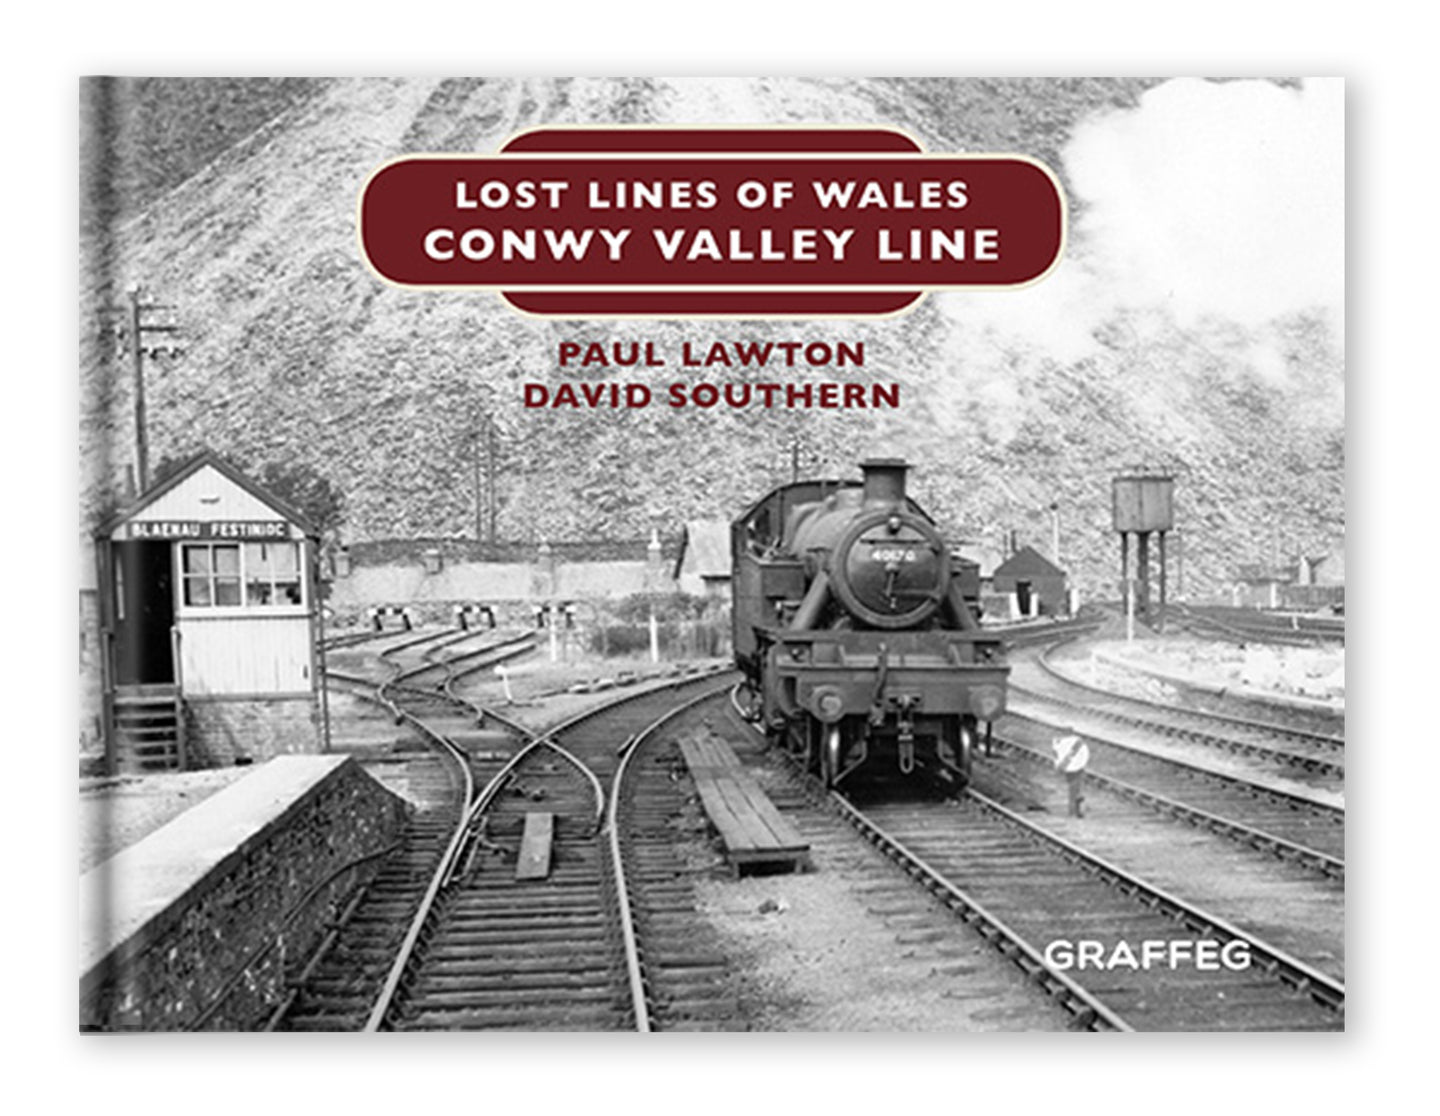 Lost Lines of Wales Conwy Valley Line by Paul Lawton and David Southern, published by Graffeg